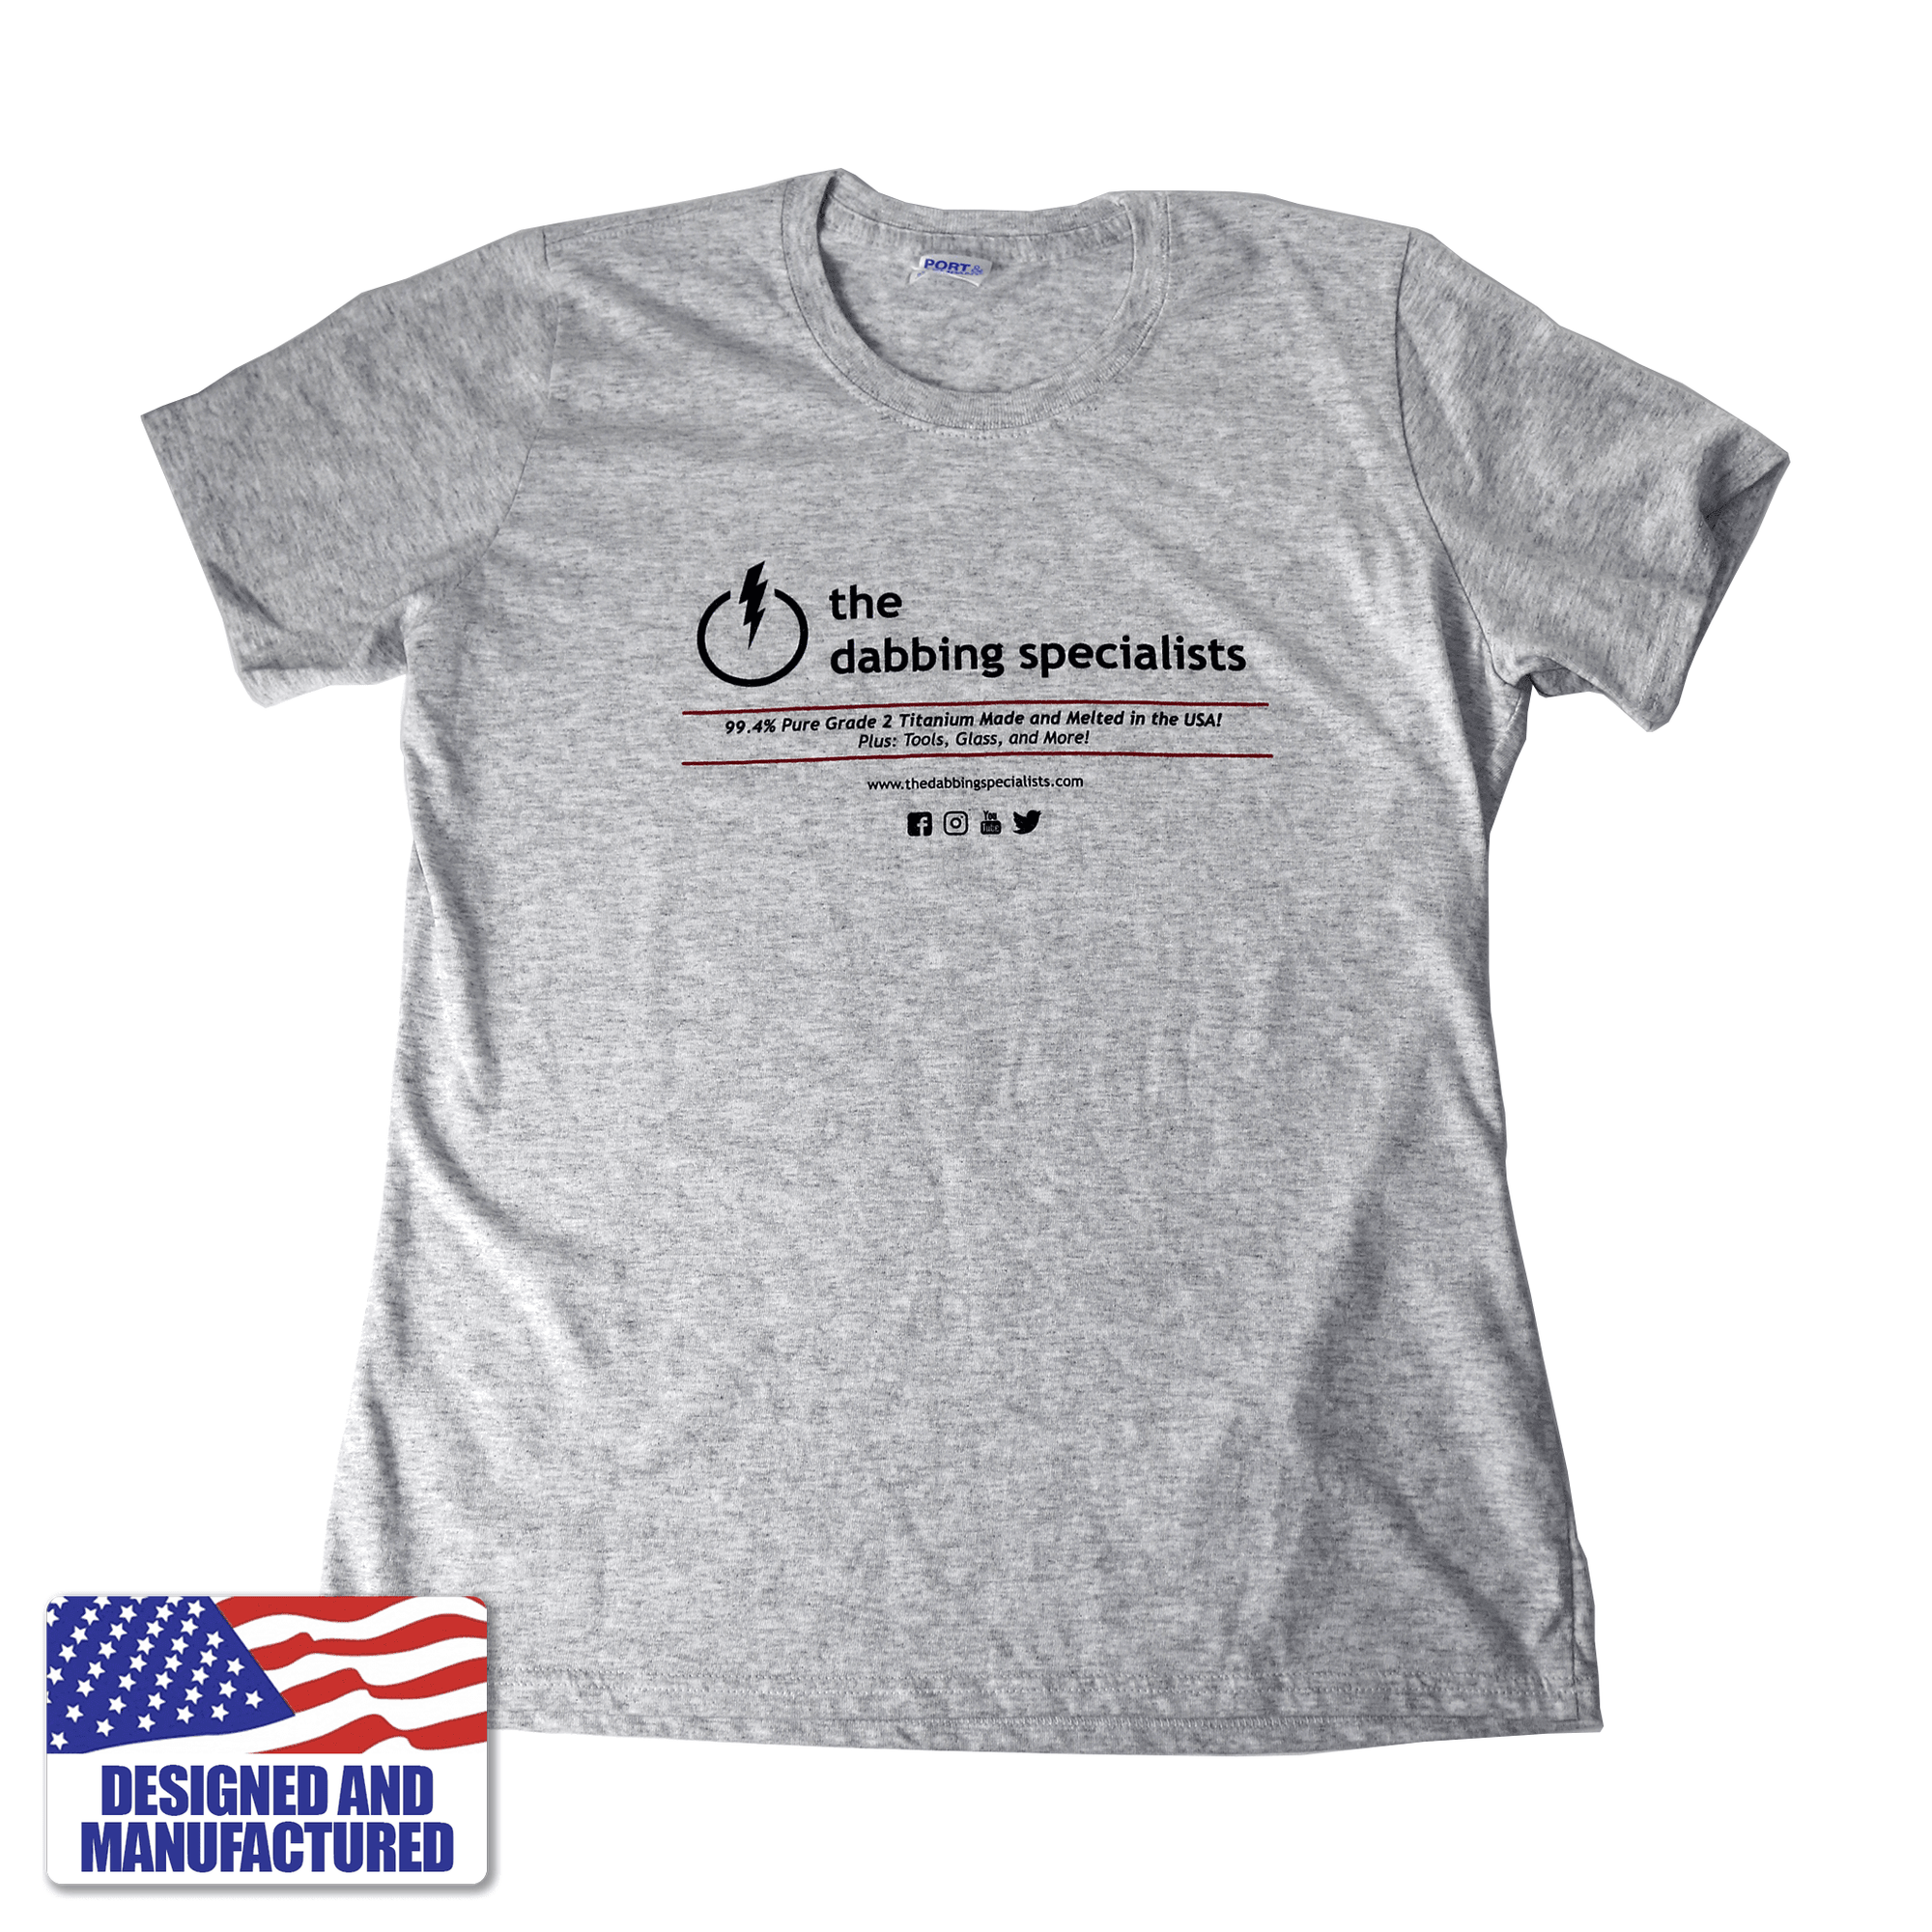 The Dabbing Specialists Motto Tee Shirt | Grey T-Shirt View | the dabbing specialists